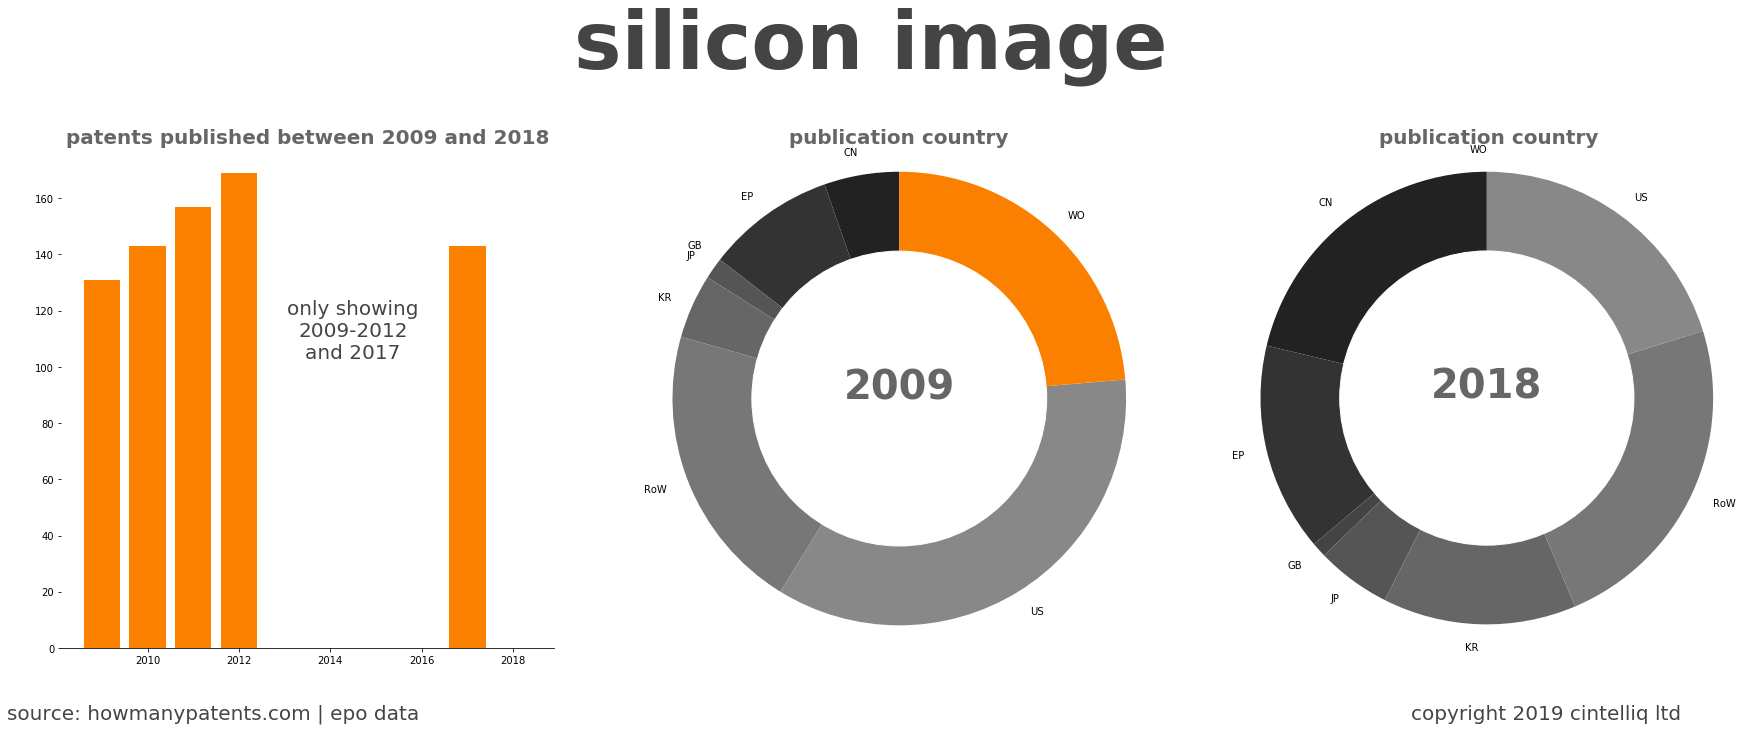 summary of patents for Silicon Image